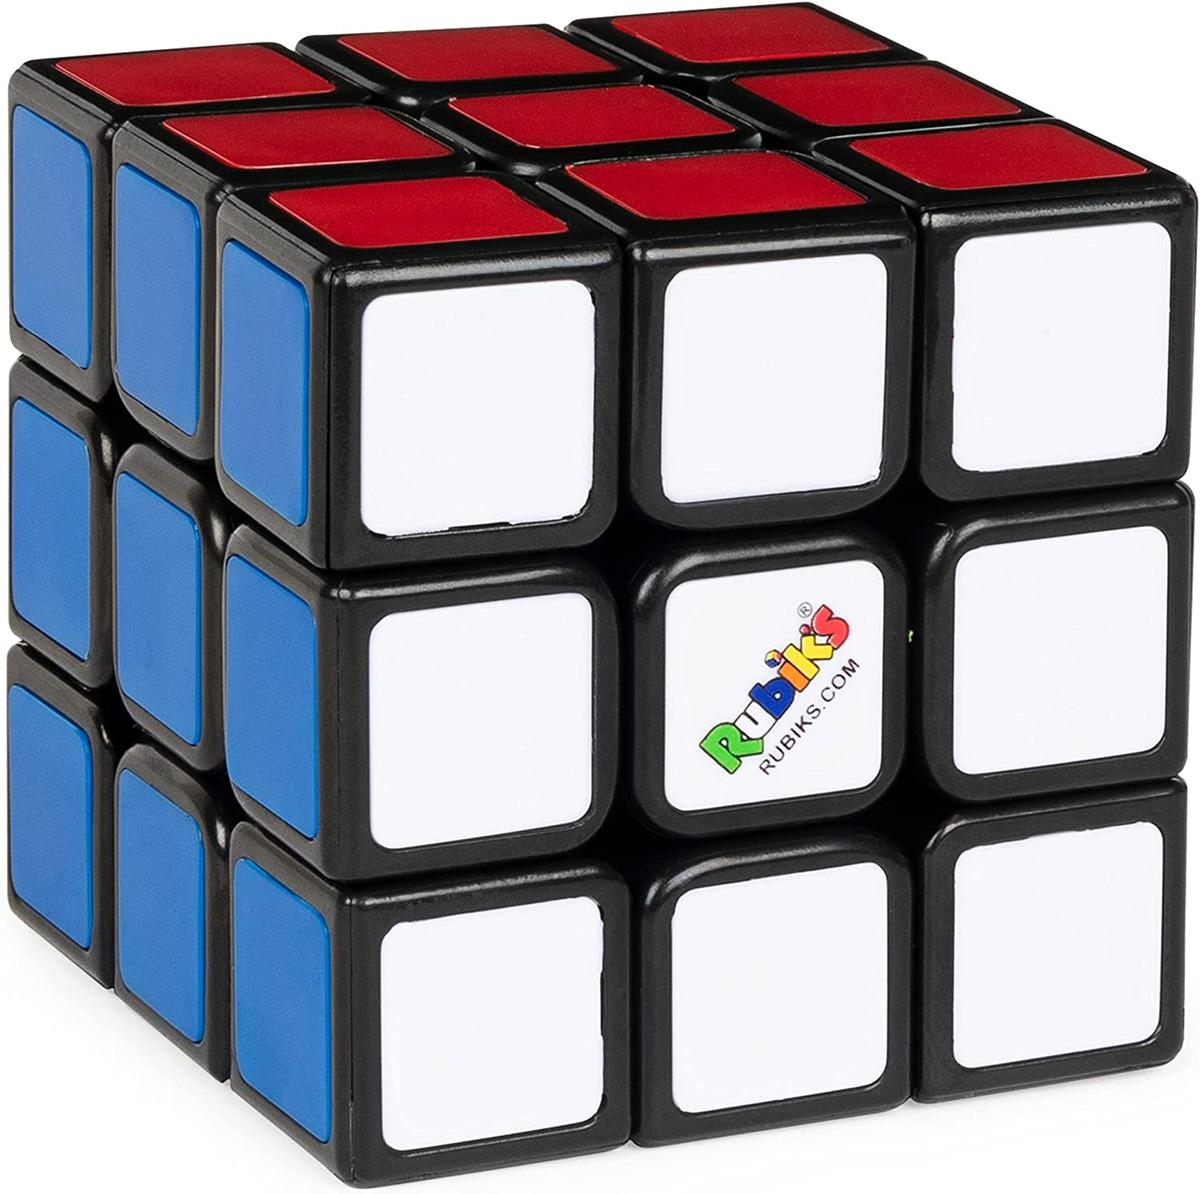 Rubiks Cube The Original Puzzle Game for $6.99